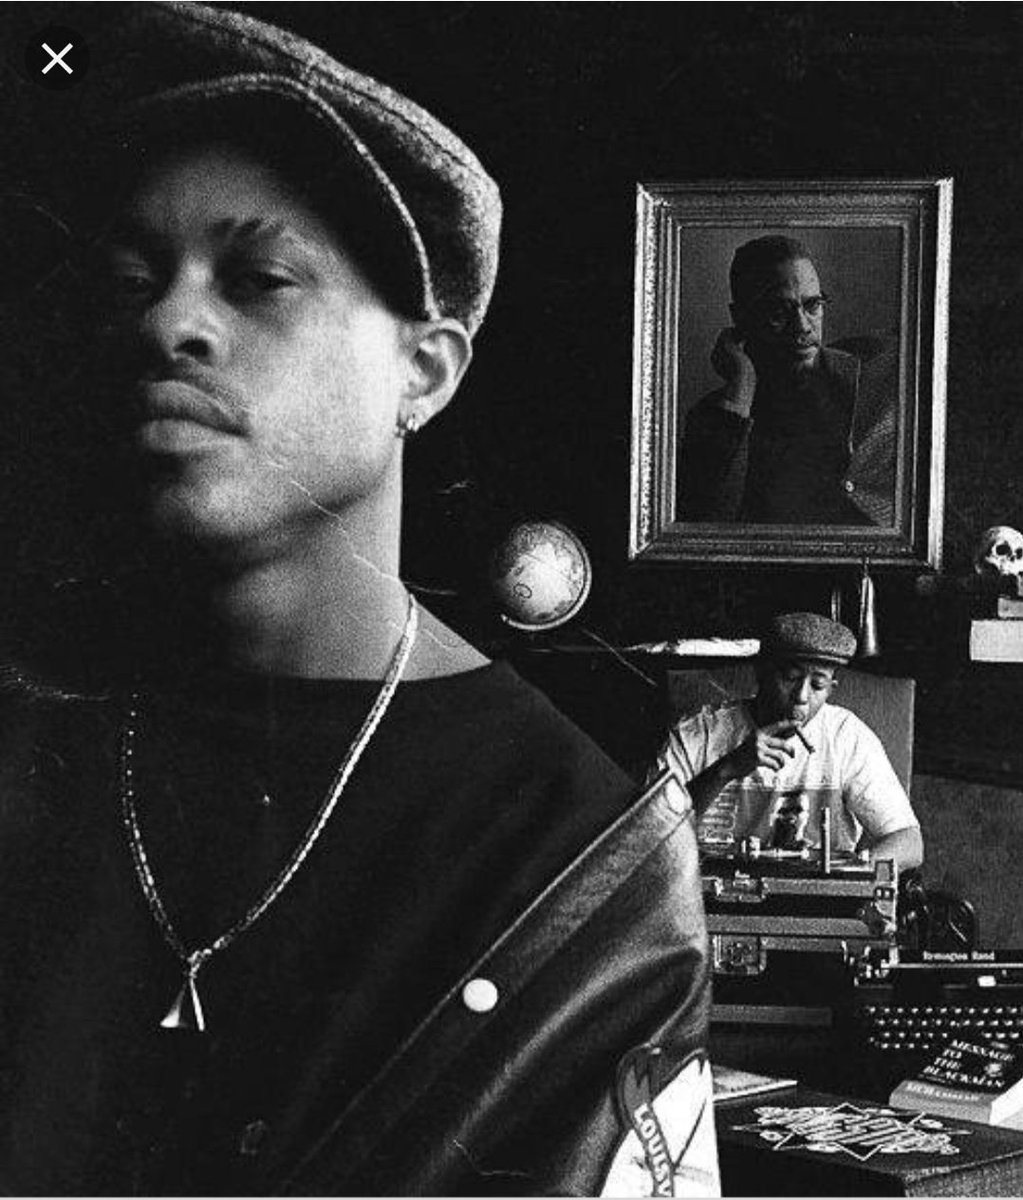 Nine years ago today we lost a LEGEND! Y'all know the history and the body of work. What are your favorite Guru songs and bars? 

Let's talk #HipHop! #PoliticDitto #GangStarr4Ever